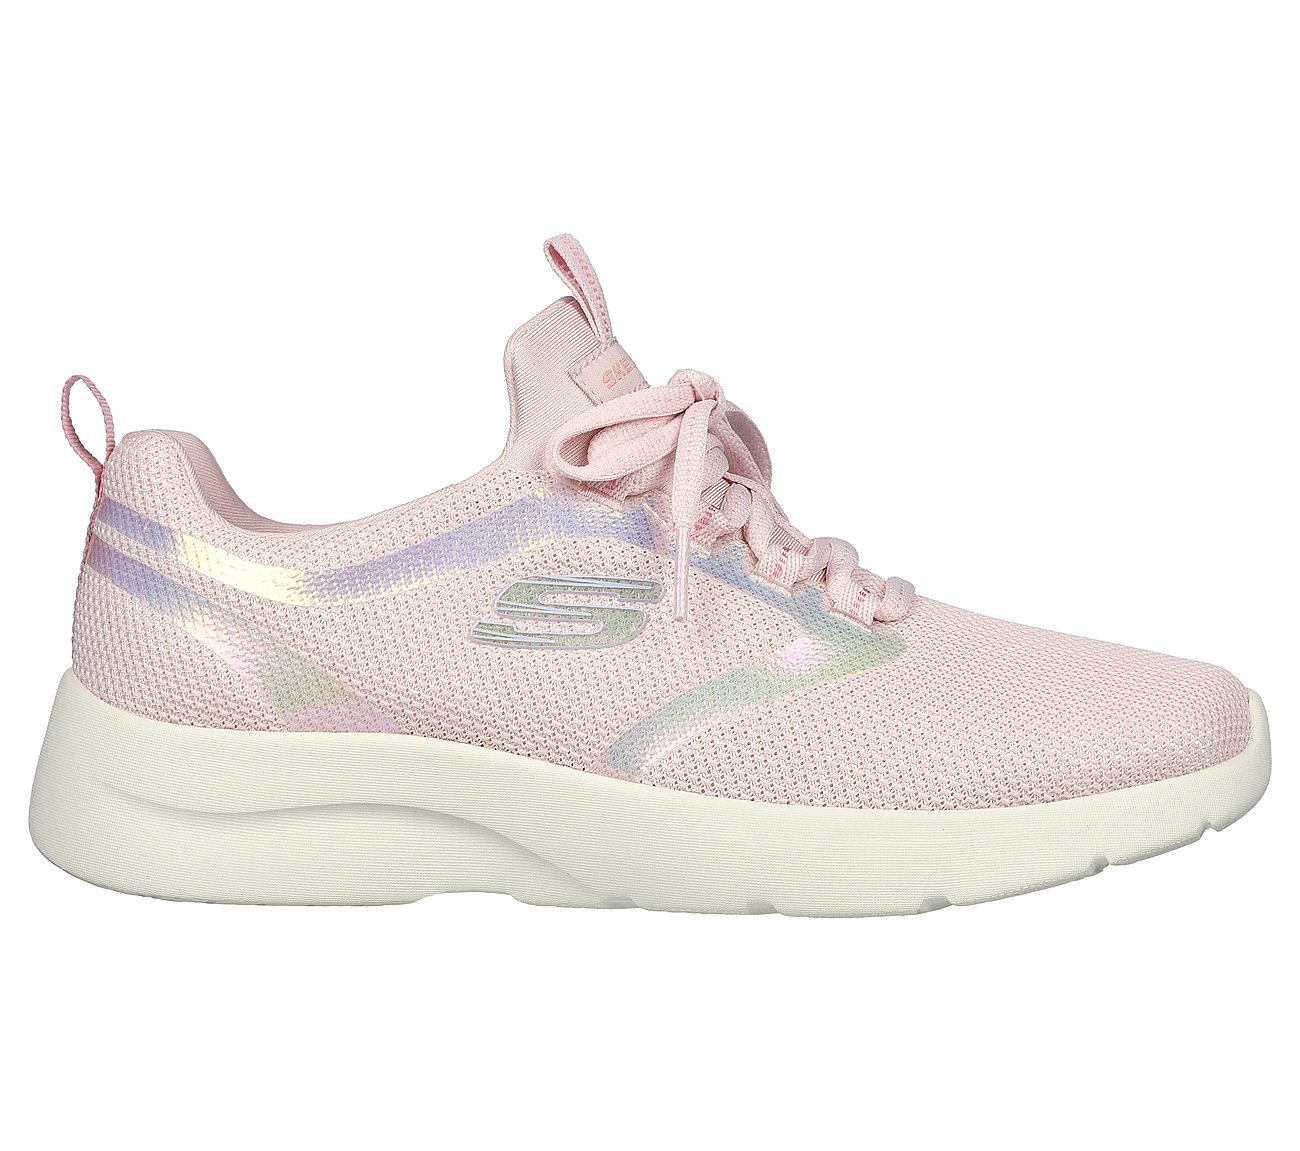 DYNAMIGHT 2, ROSE Footwear Lateral View